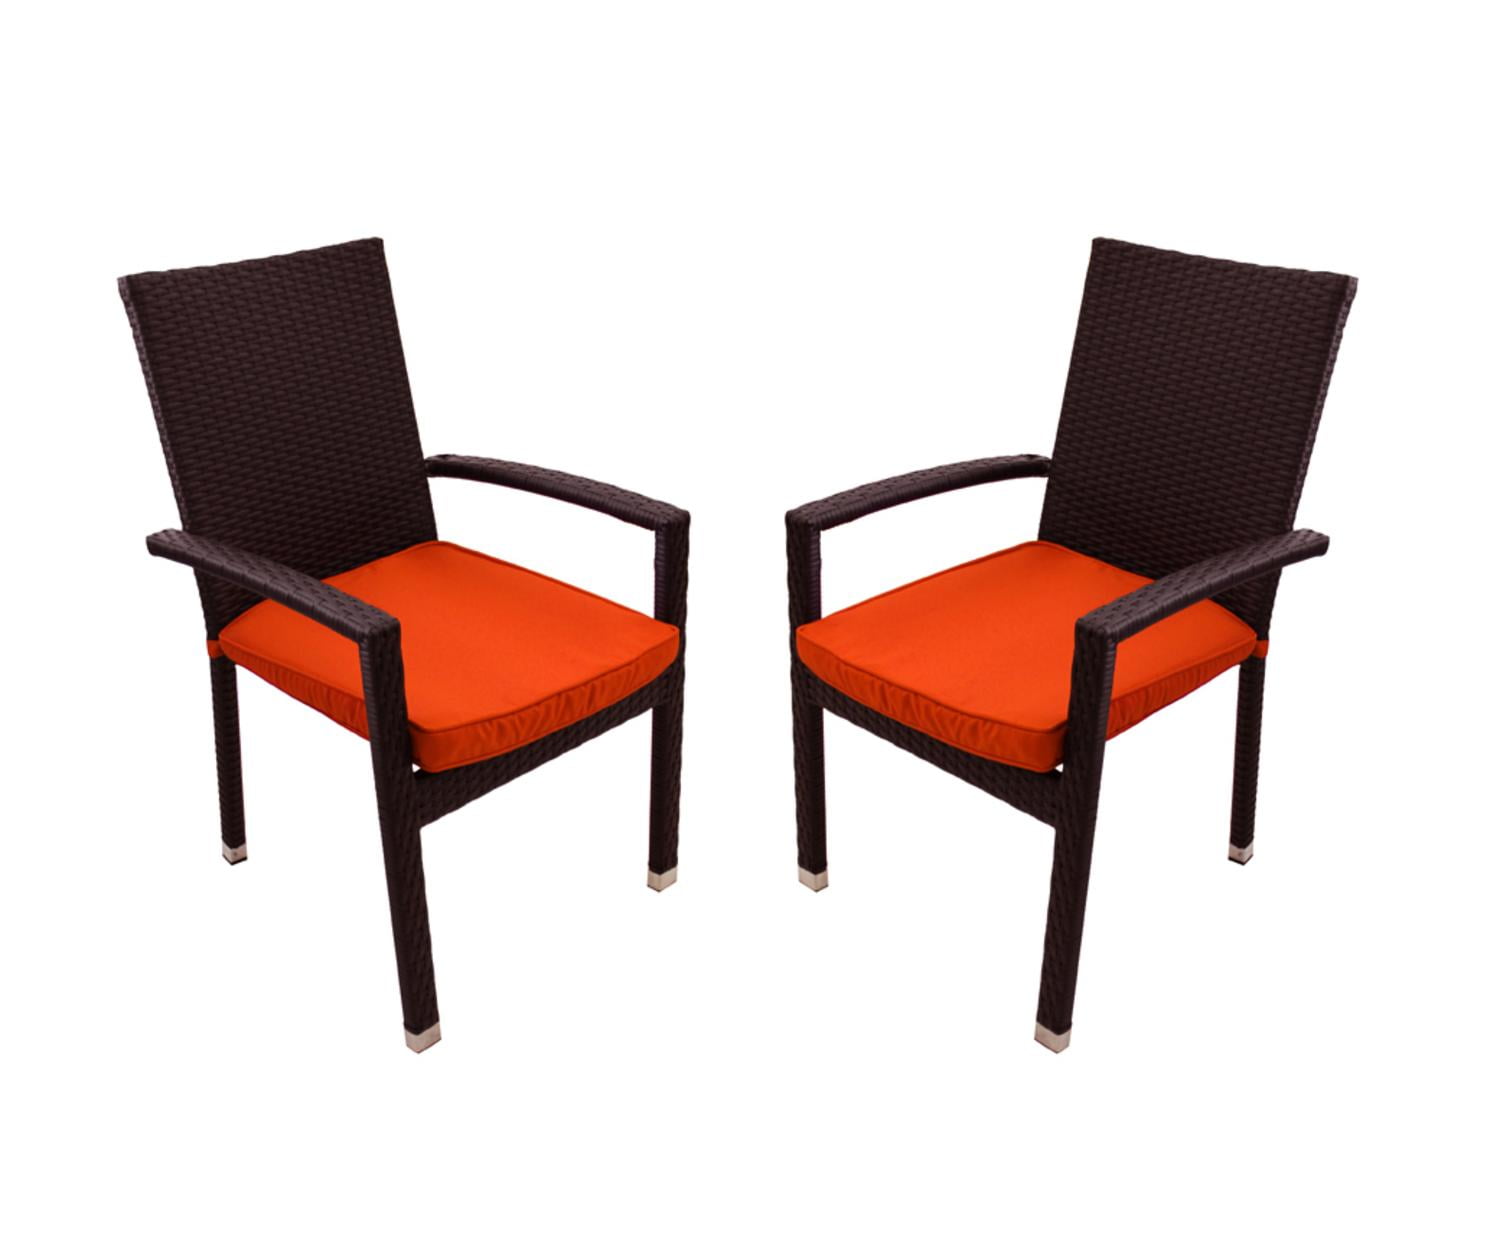 set of 2 black resin wicker outdoor patio furniture dining